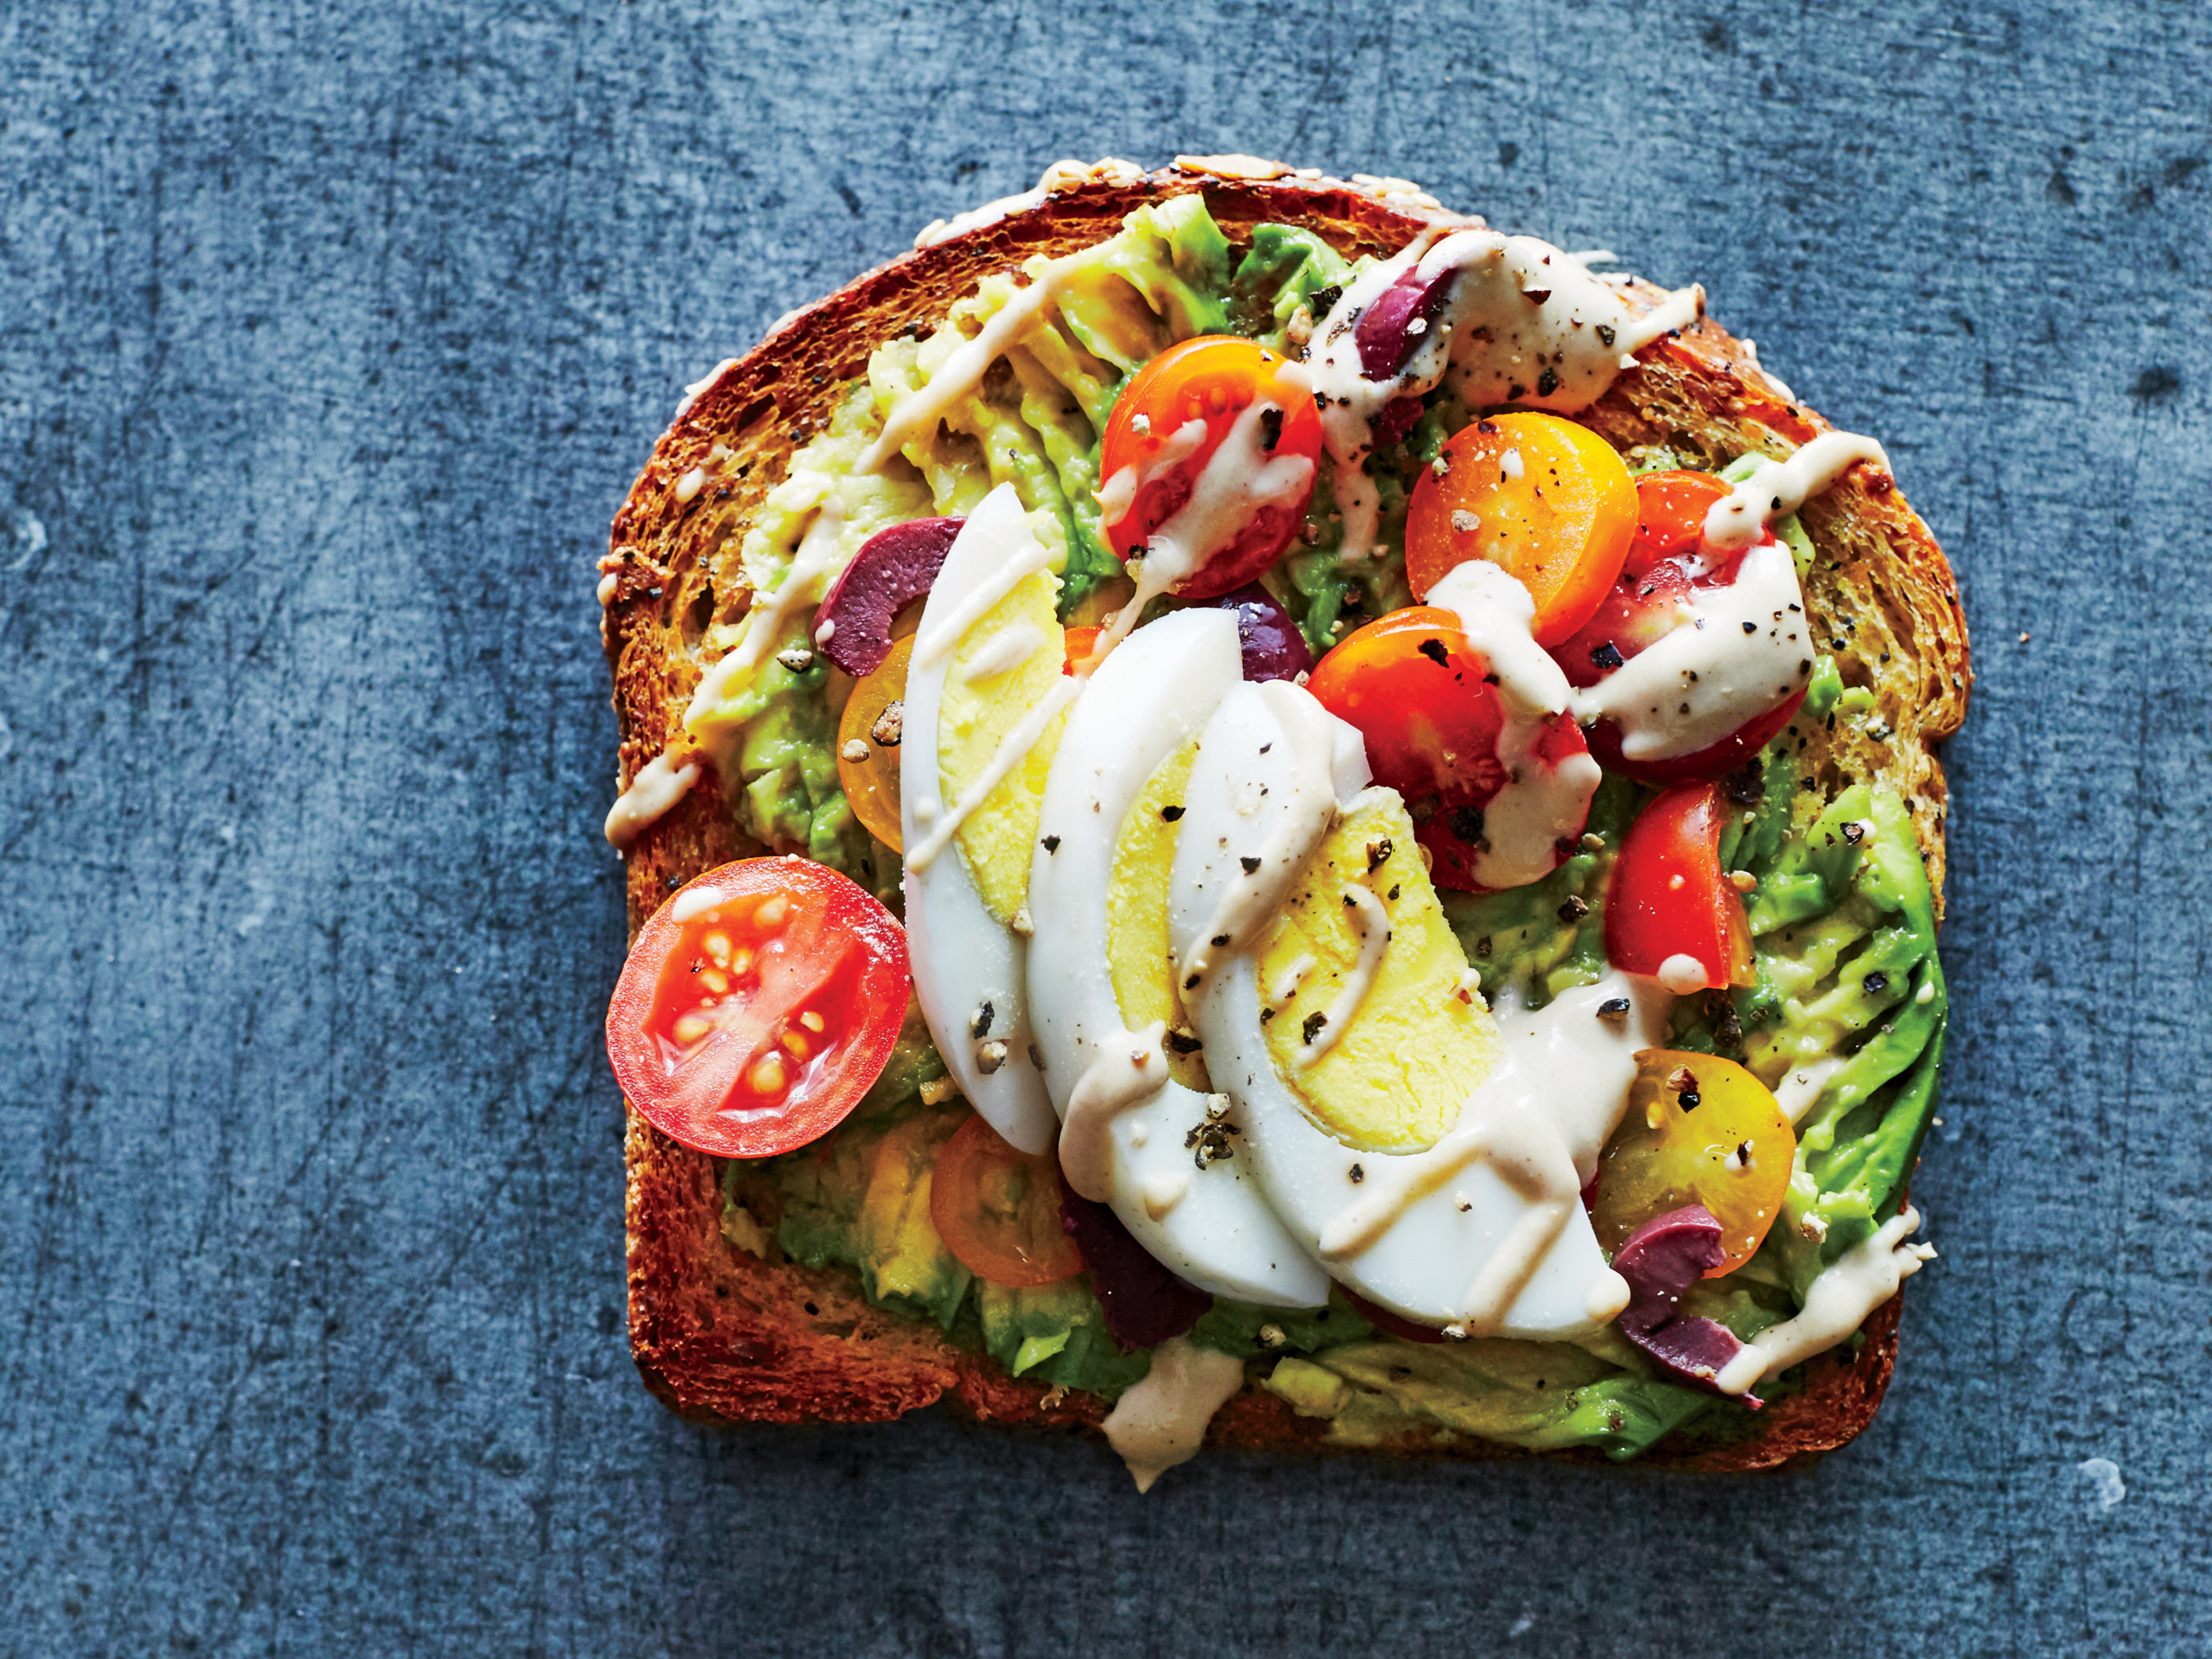 Avocado tahini toast for your hurry morning. Prepare breakfast in less than 10 minutes. Get 10 more quick breakfast recipes ideas for hurry morning.  